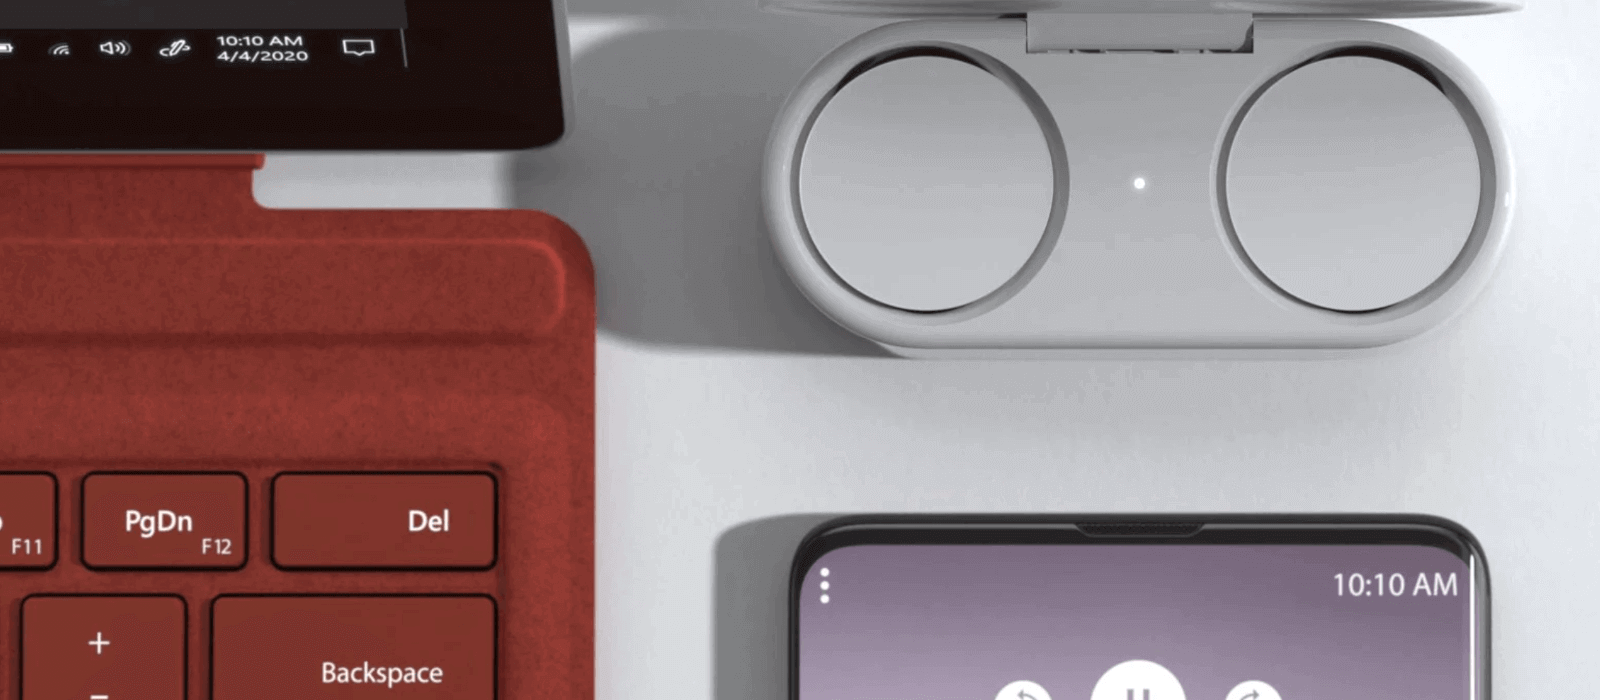 The charging case with the included Surface Earbuds is placed next to the Surface Pro 7 with the poppy-red Type Cover and a Smartphone